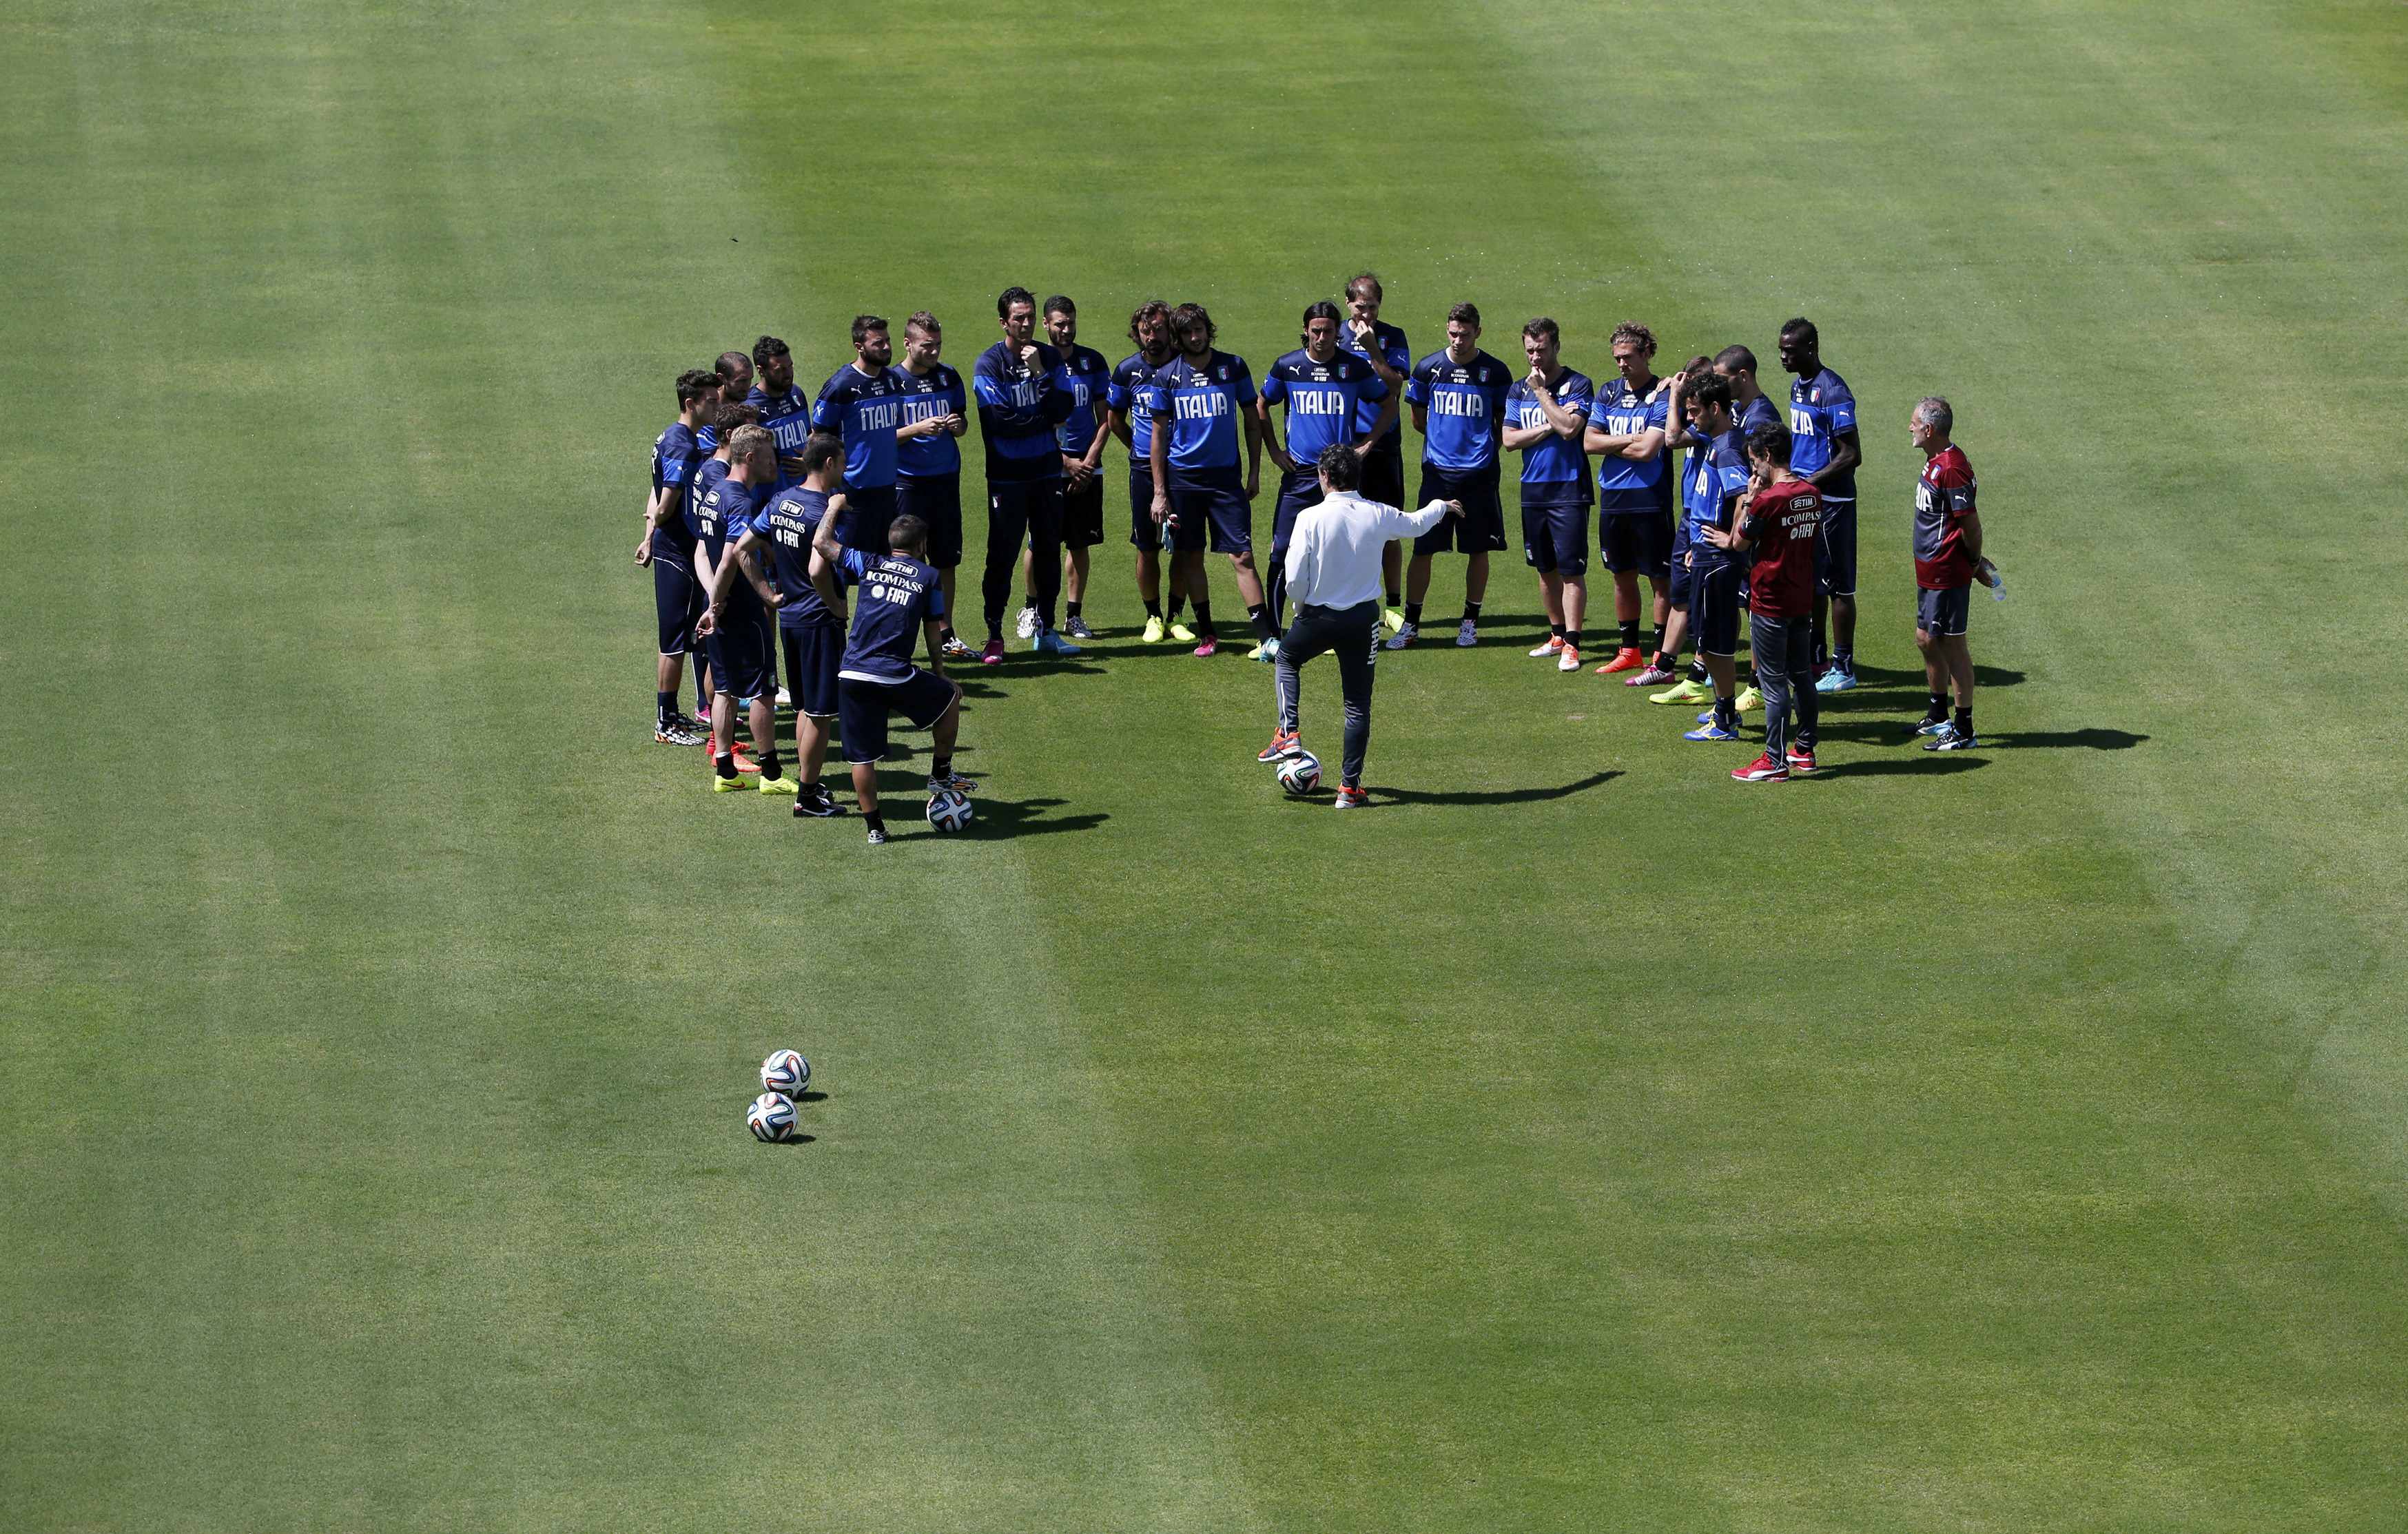 Italy's national soccer team coach Cesare Prandelli (C) talks to his players during a training session at the Maria Lamas Farache-Frasqueirao stadium in Natal, June 22, 2014.  REUTERS/Carlos Barria (BRAZIL  - Tags: SOCCER SPORT WORLD CUP)  